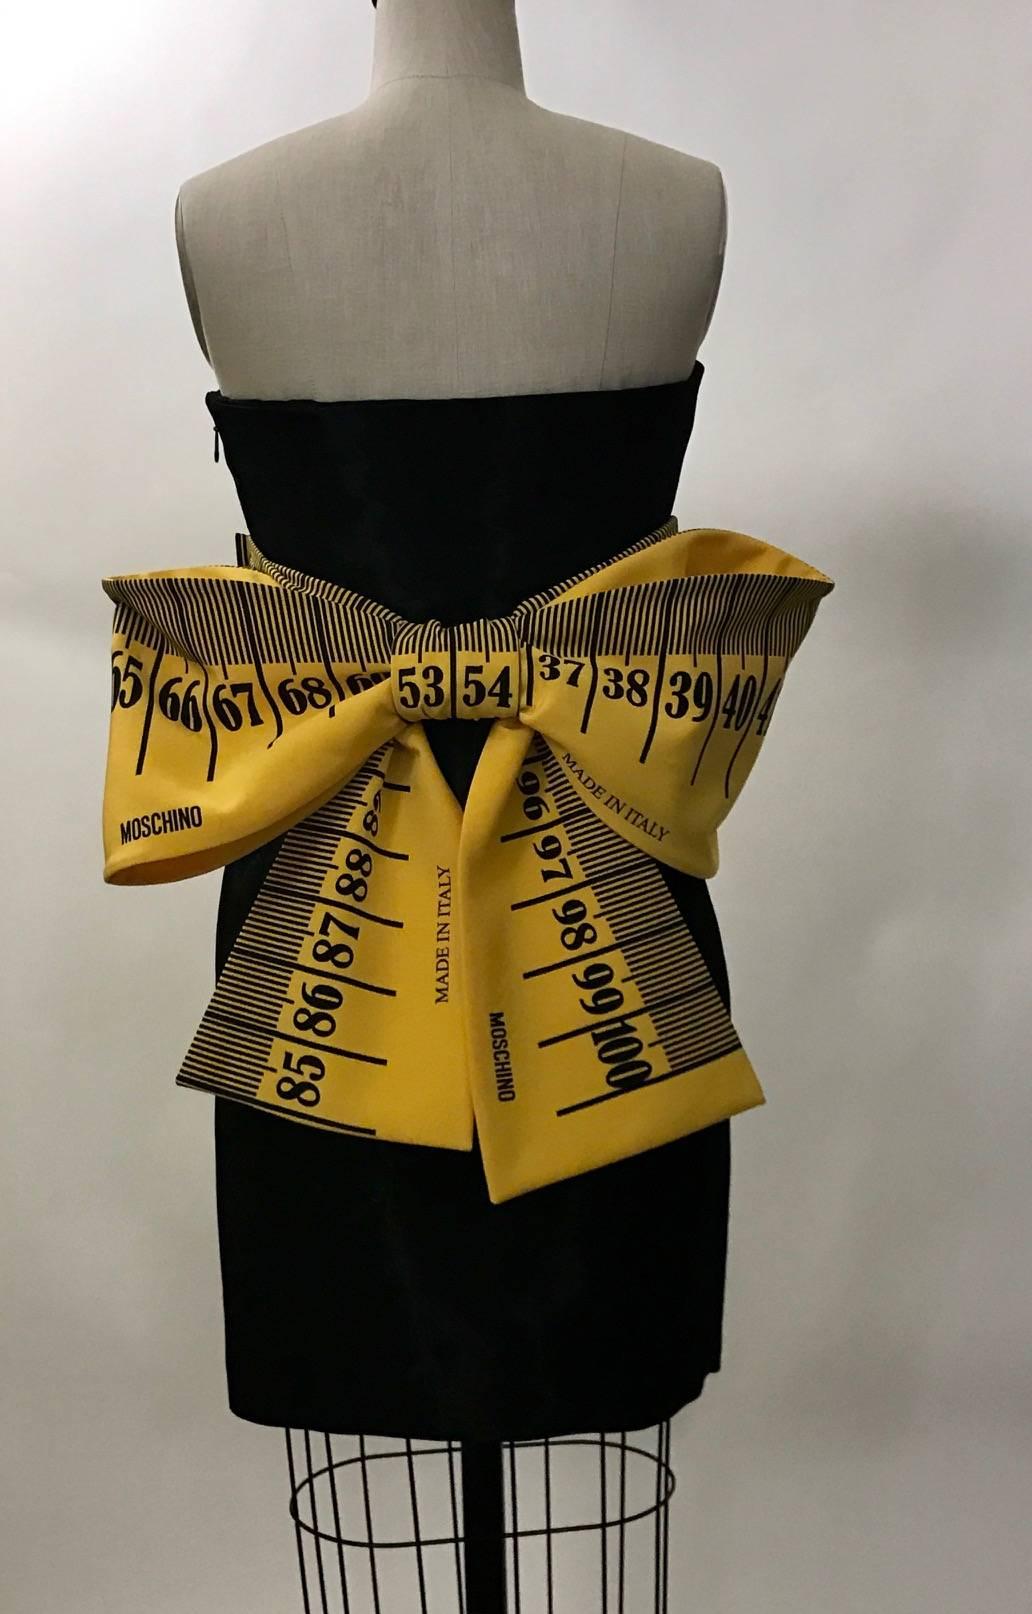 Recent Moschino Couture by Jeremy Scott black strapless dress with sweetheart neckline and wide measuring tape sash tied in a giant bow at back. Black material has a light sheen. Measuring tape reads 'Moschino' and 'Made in Italy.'  Built in corset